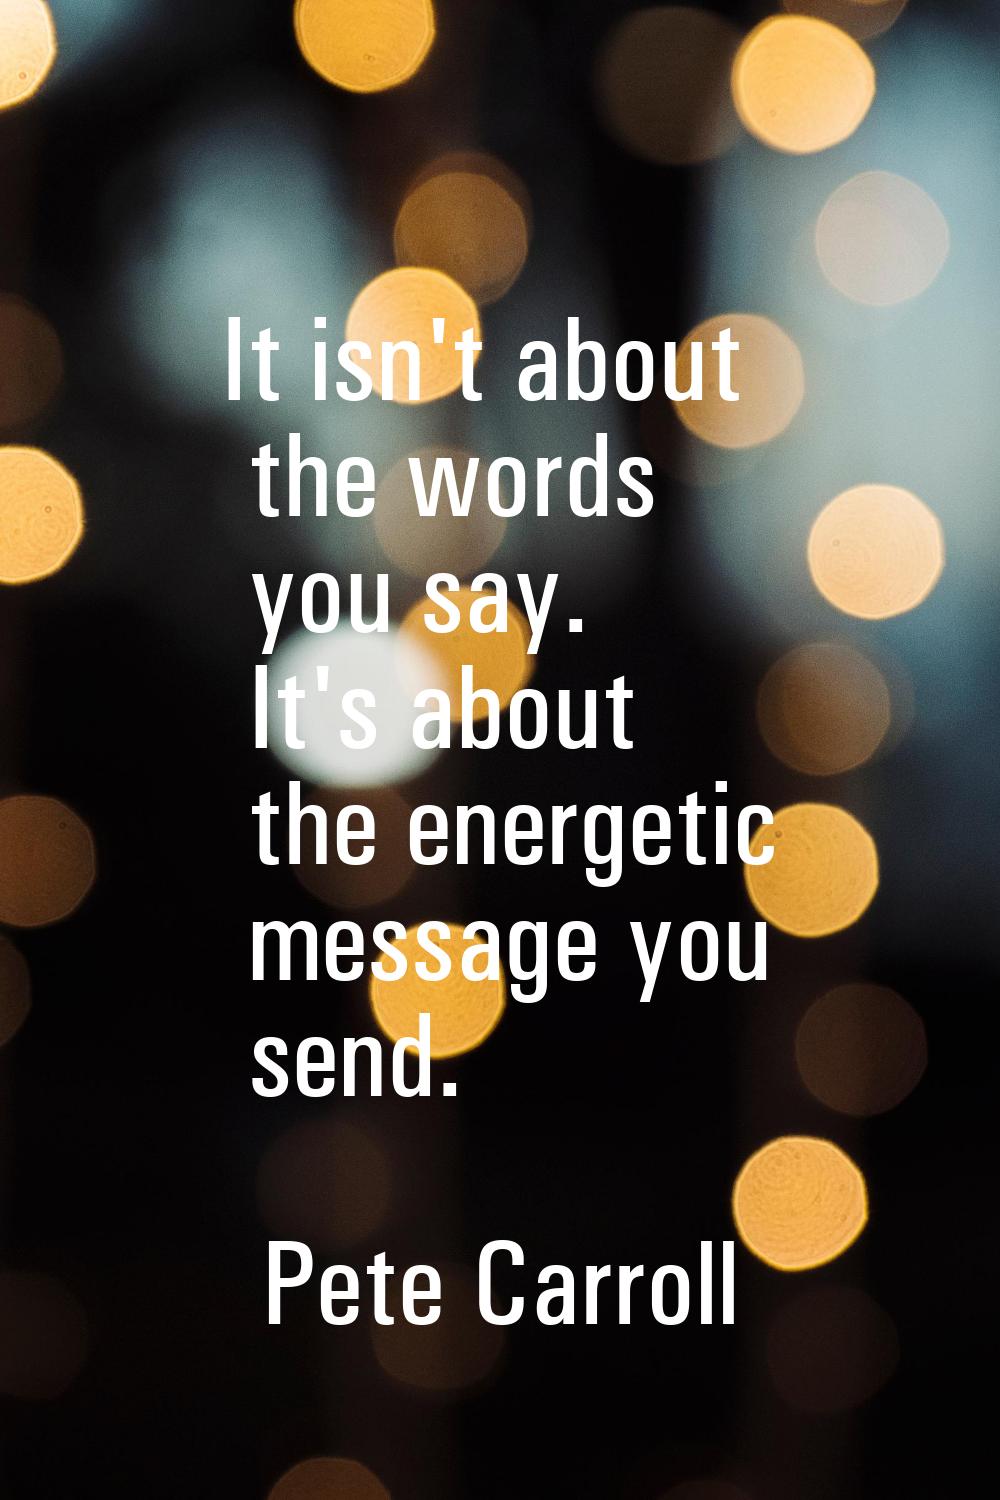 It isn't about the words you say. It's about the energetic message you send.